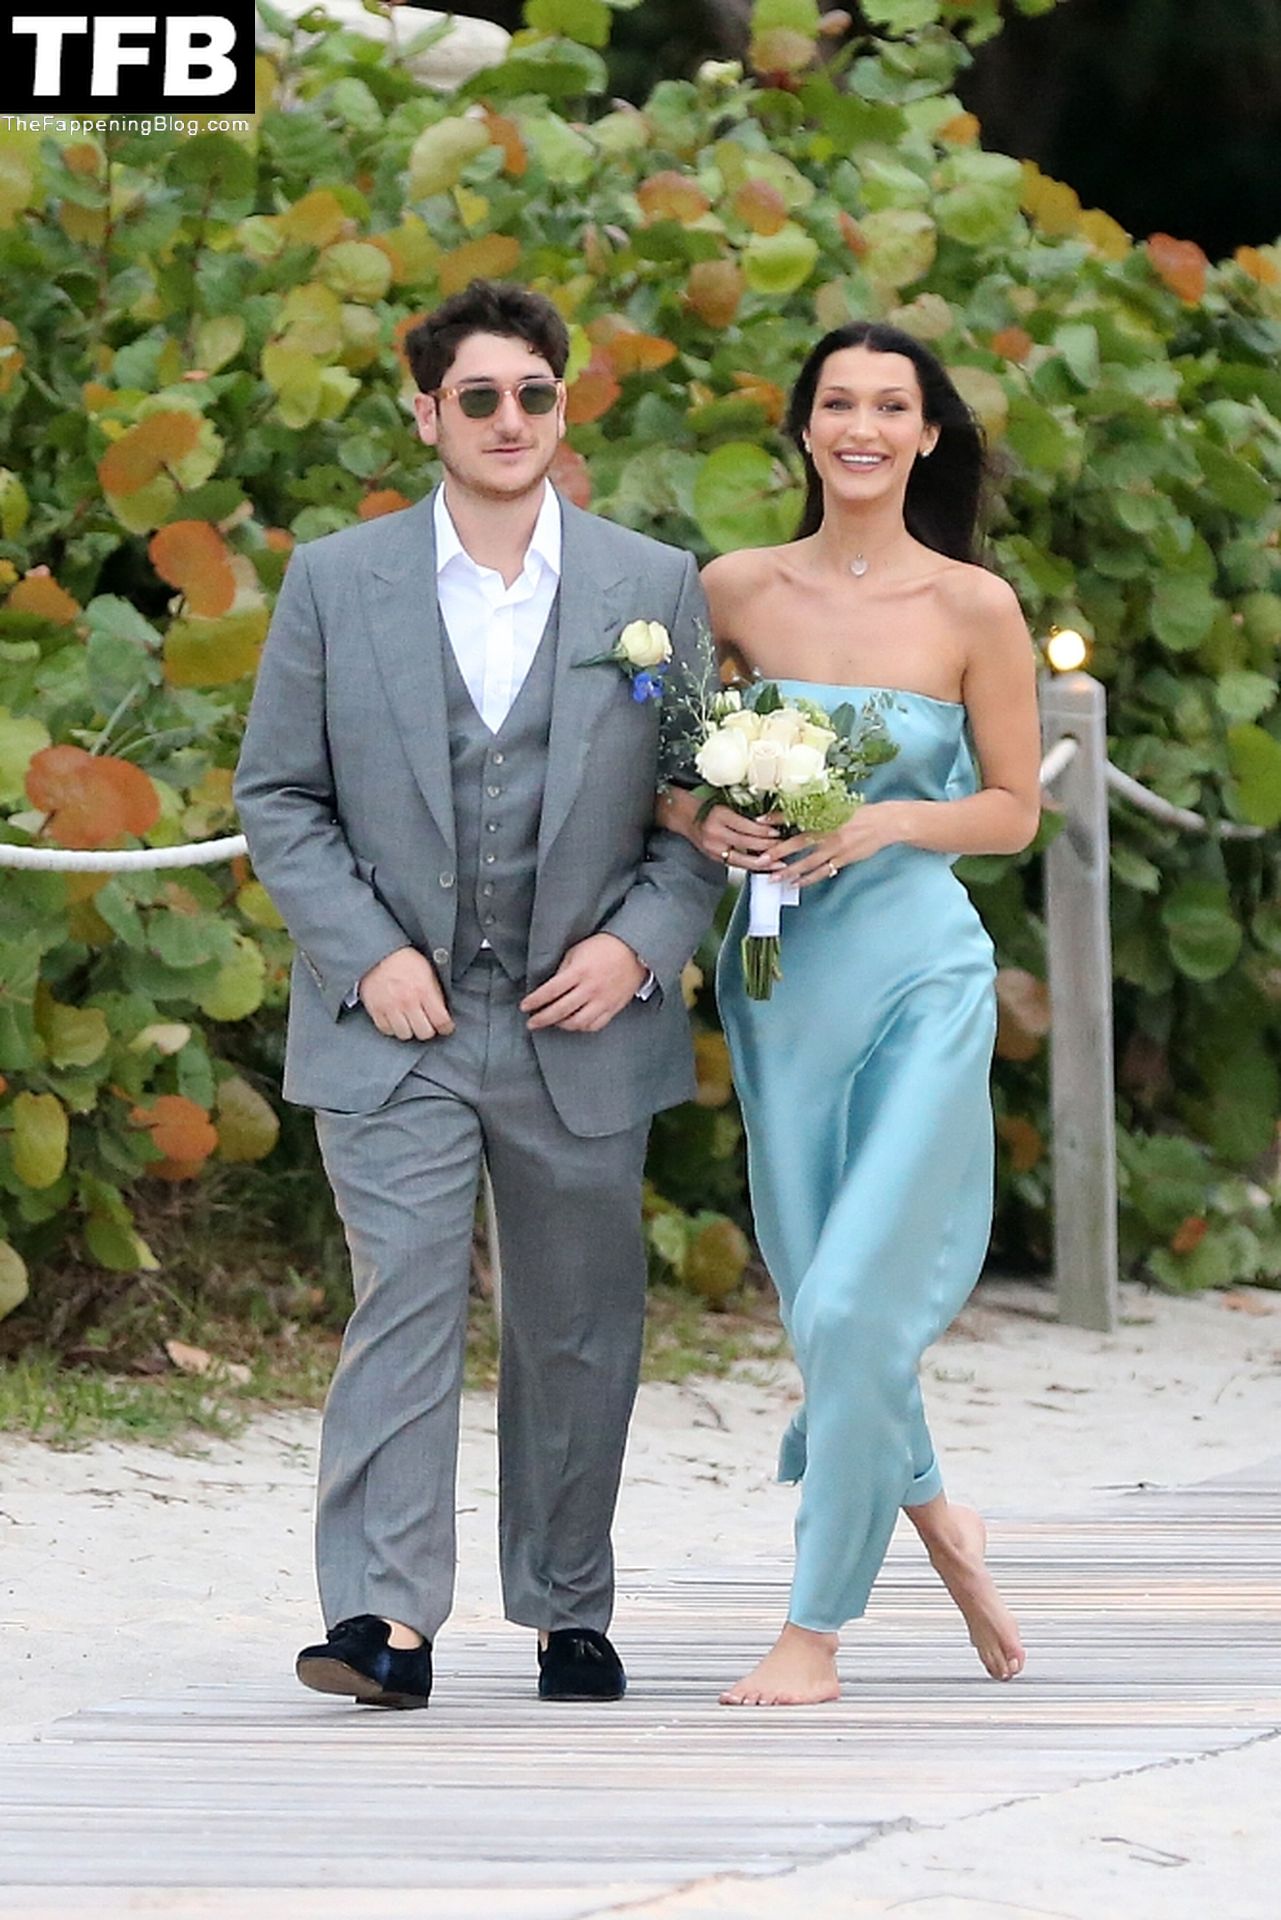 Kendall Jenner & Bella Hadid Look Radiant as Barefoot Bridesmaids at a Beach Wedding in Miami (90 Photos)